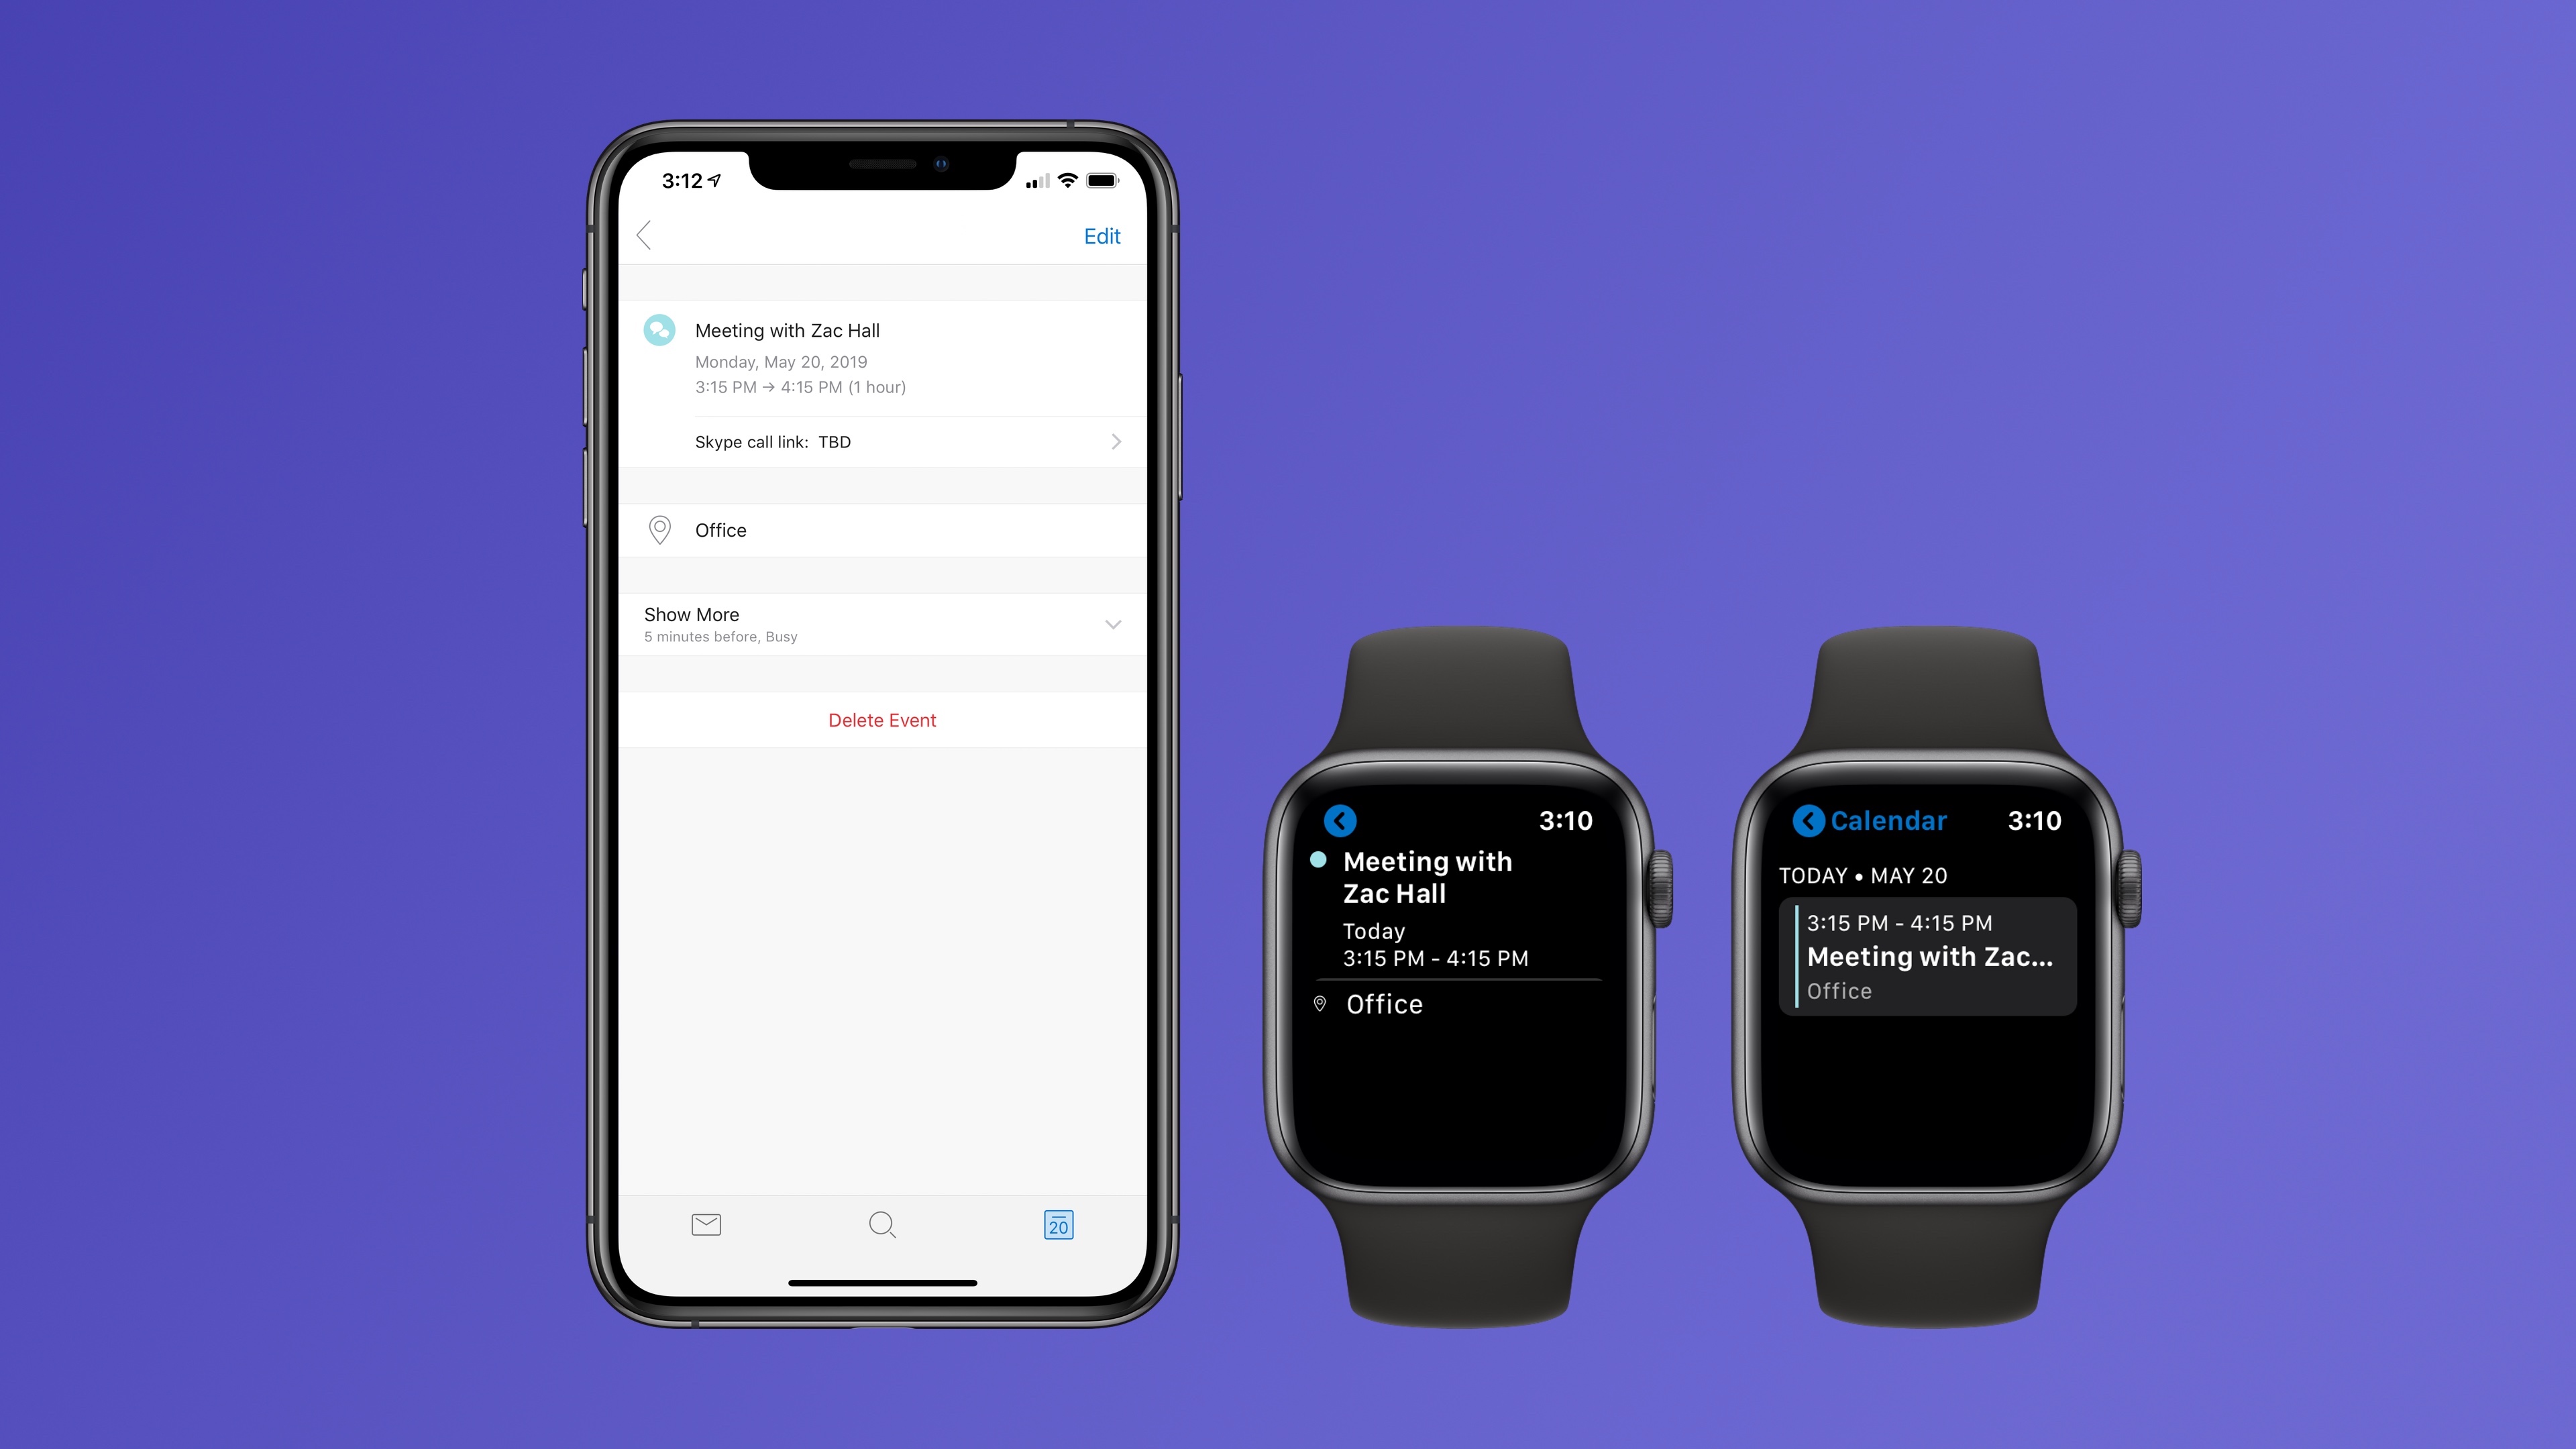 Microsoft Outlook adds revamped Apple Watch notifications 9to5Mac